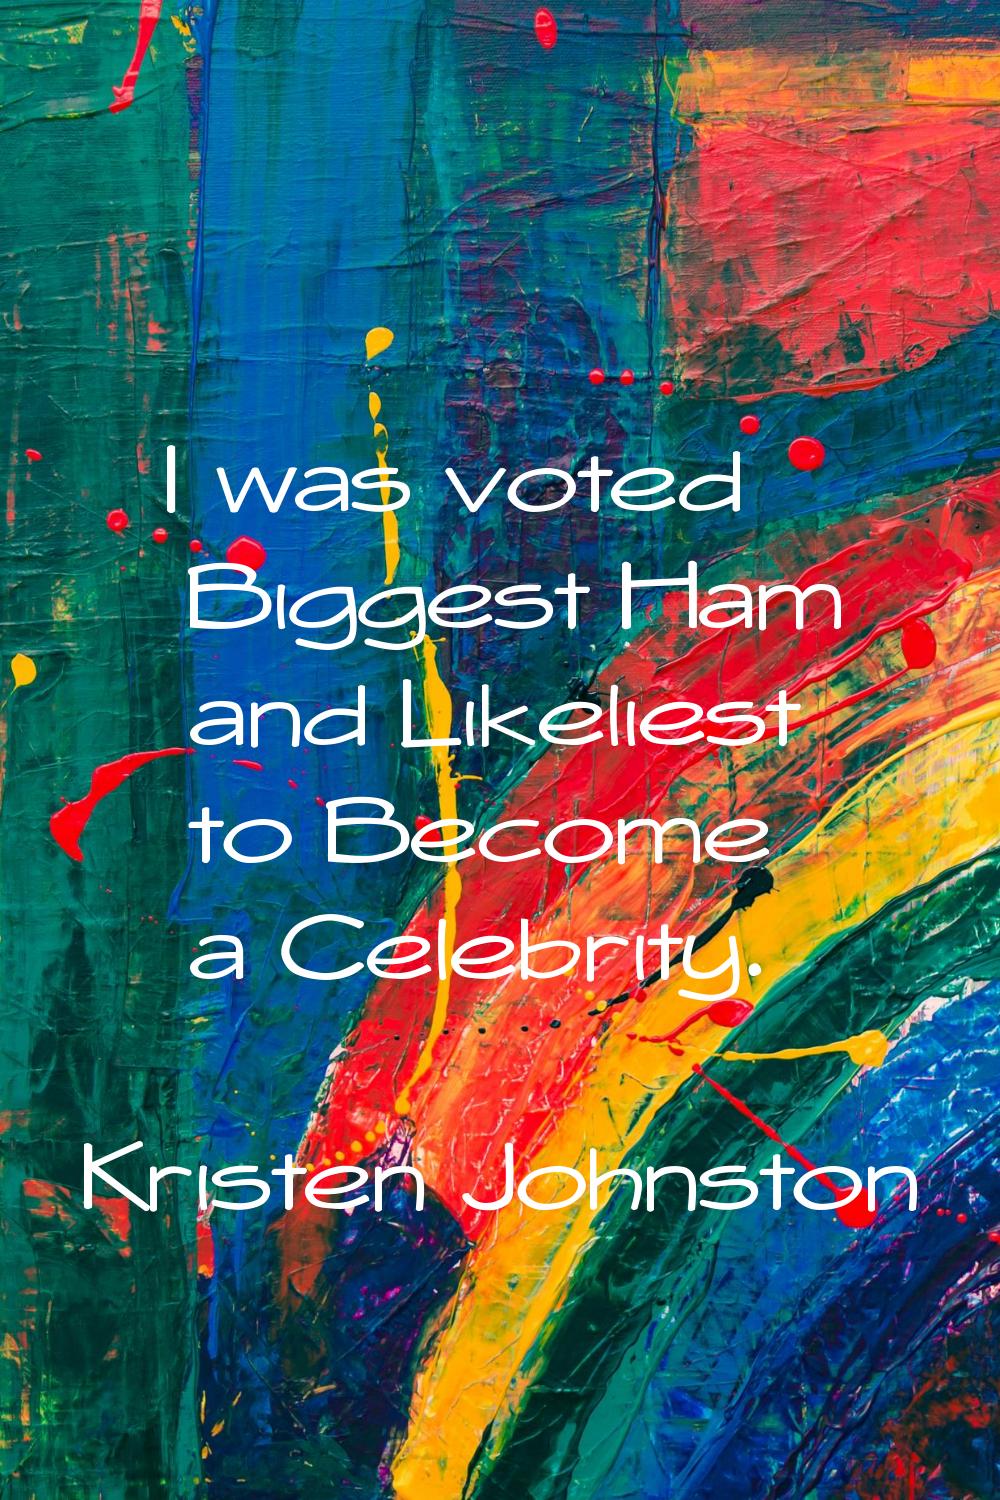 I was voted Biggest Ham and Likeliest to Become a Celebrity.